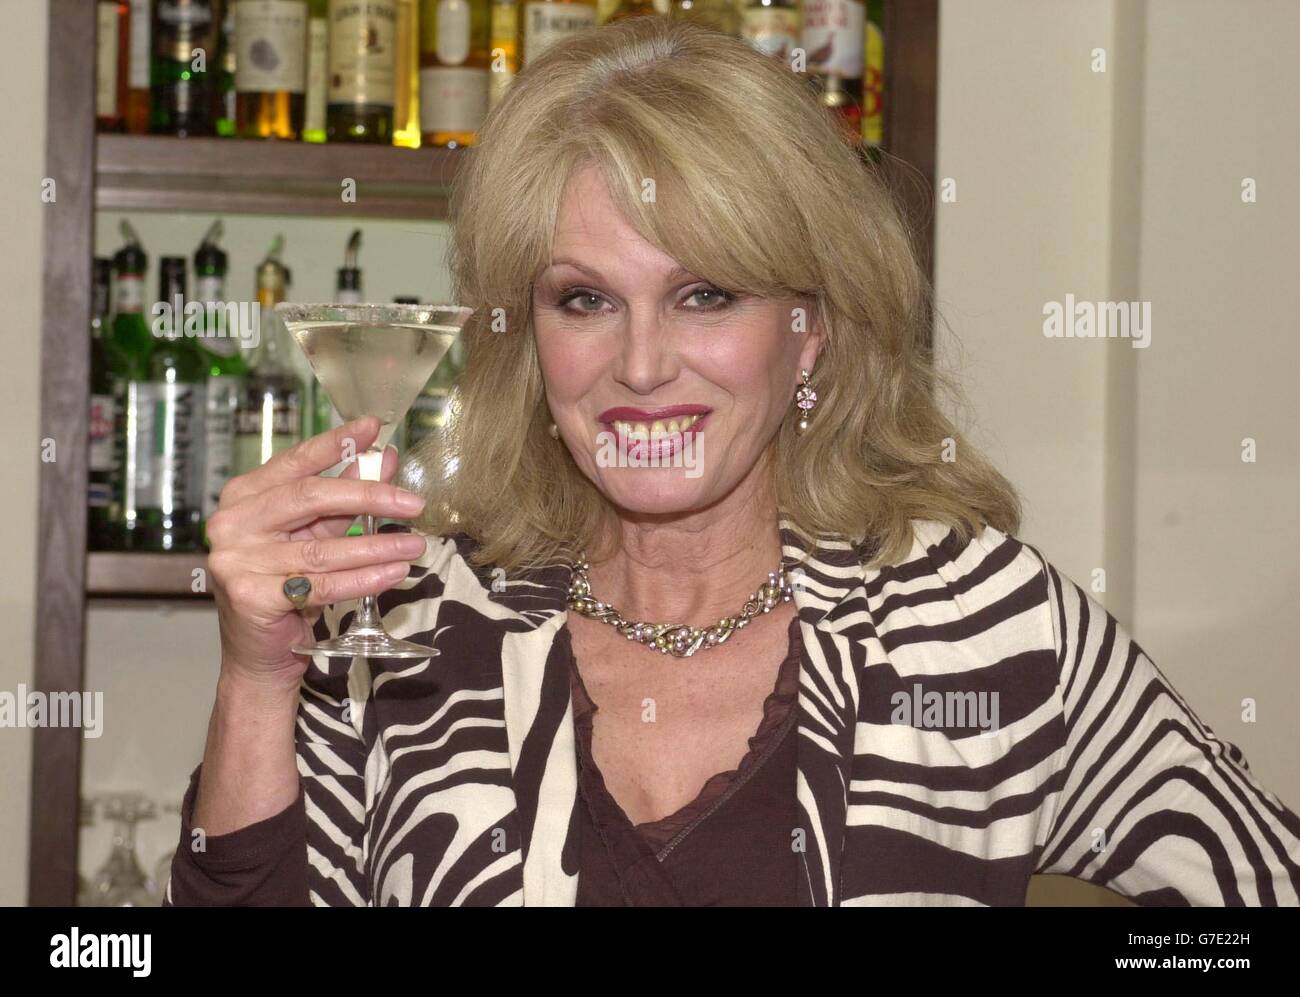 Actress Joanna Lumley launches a new cocktail entitled 'High And Wild' - made with Tequila, elderflower and salt - at The Cavendish hotel on Piccadilly, central London. The non-alcoholic version, 'Wild And Free', consists of elderflower, sparkling water and lime. The cocktail will be sold exclusively at the hotel, which will help raise money for Born Free, the animal welfare and conservation charity. Stock Photo